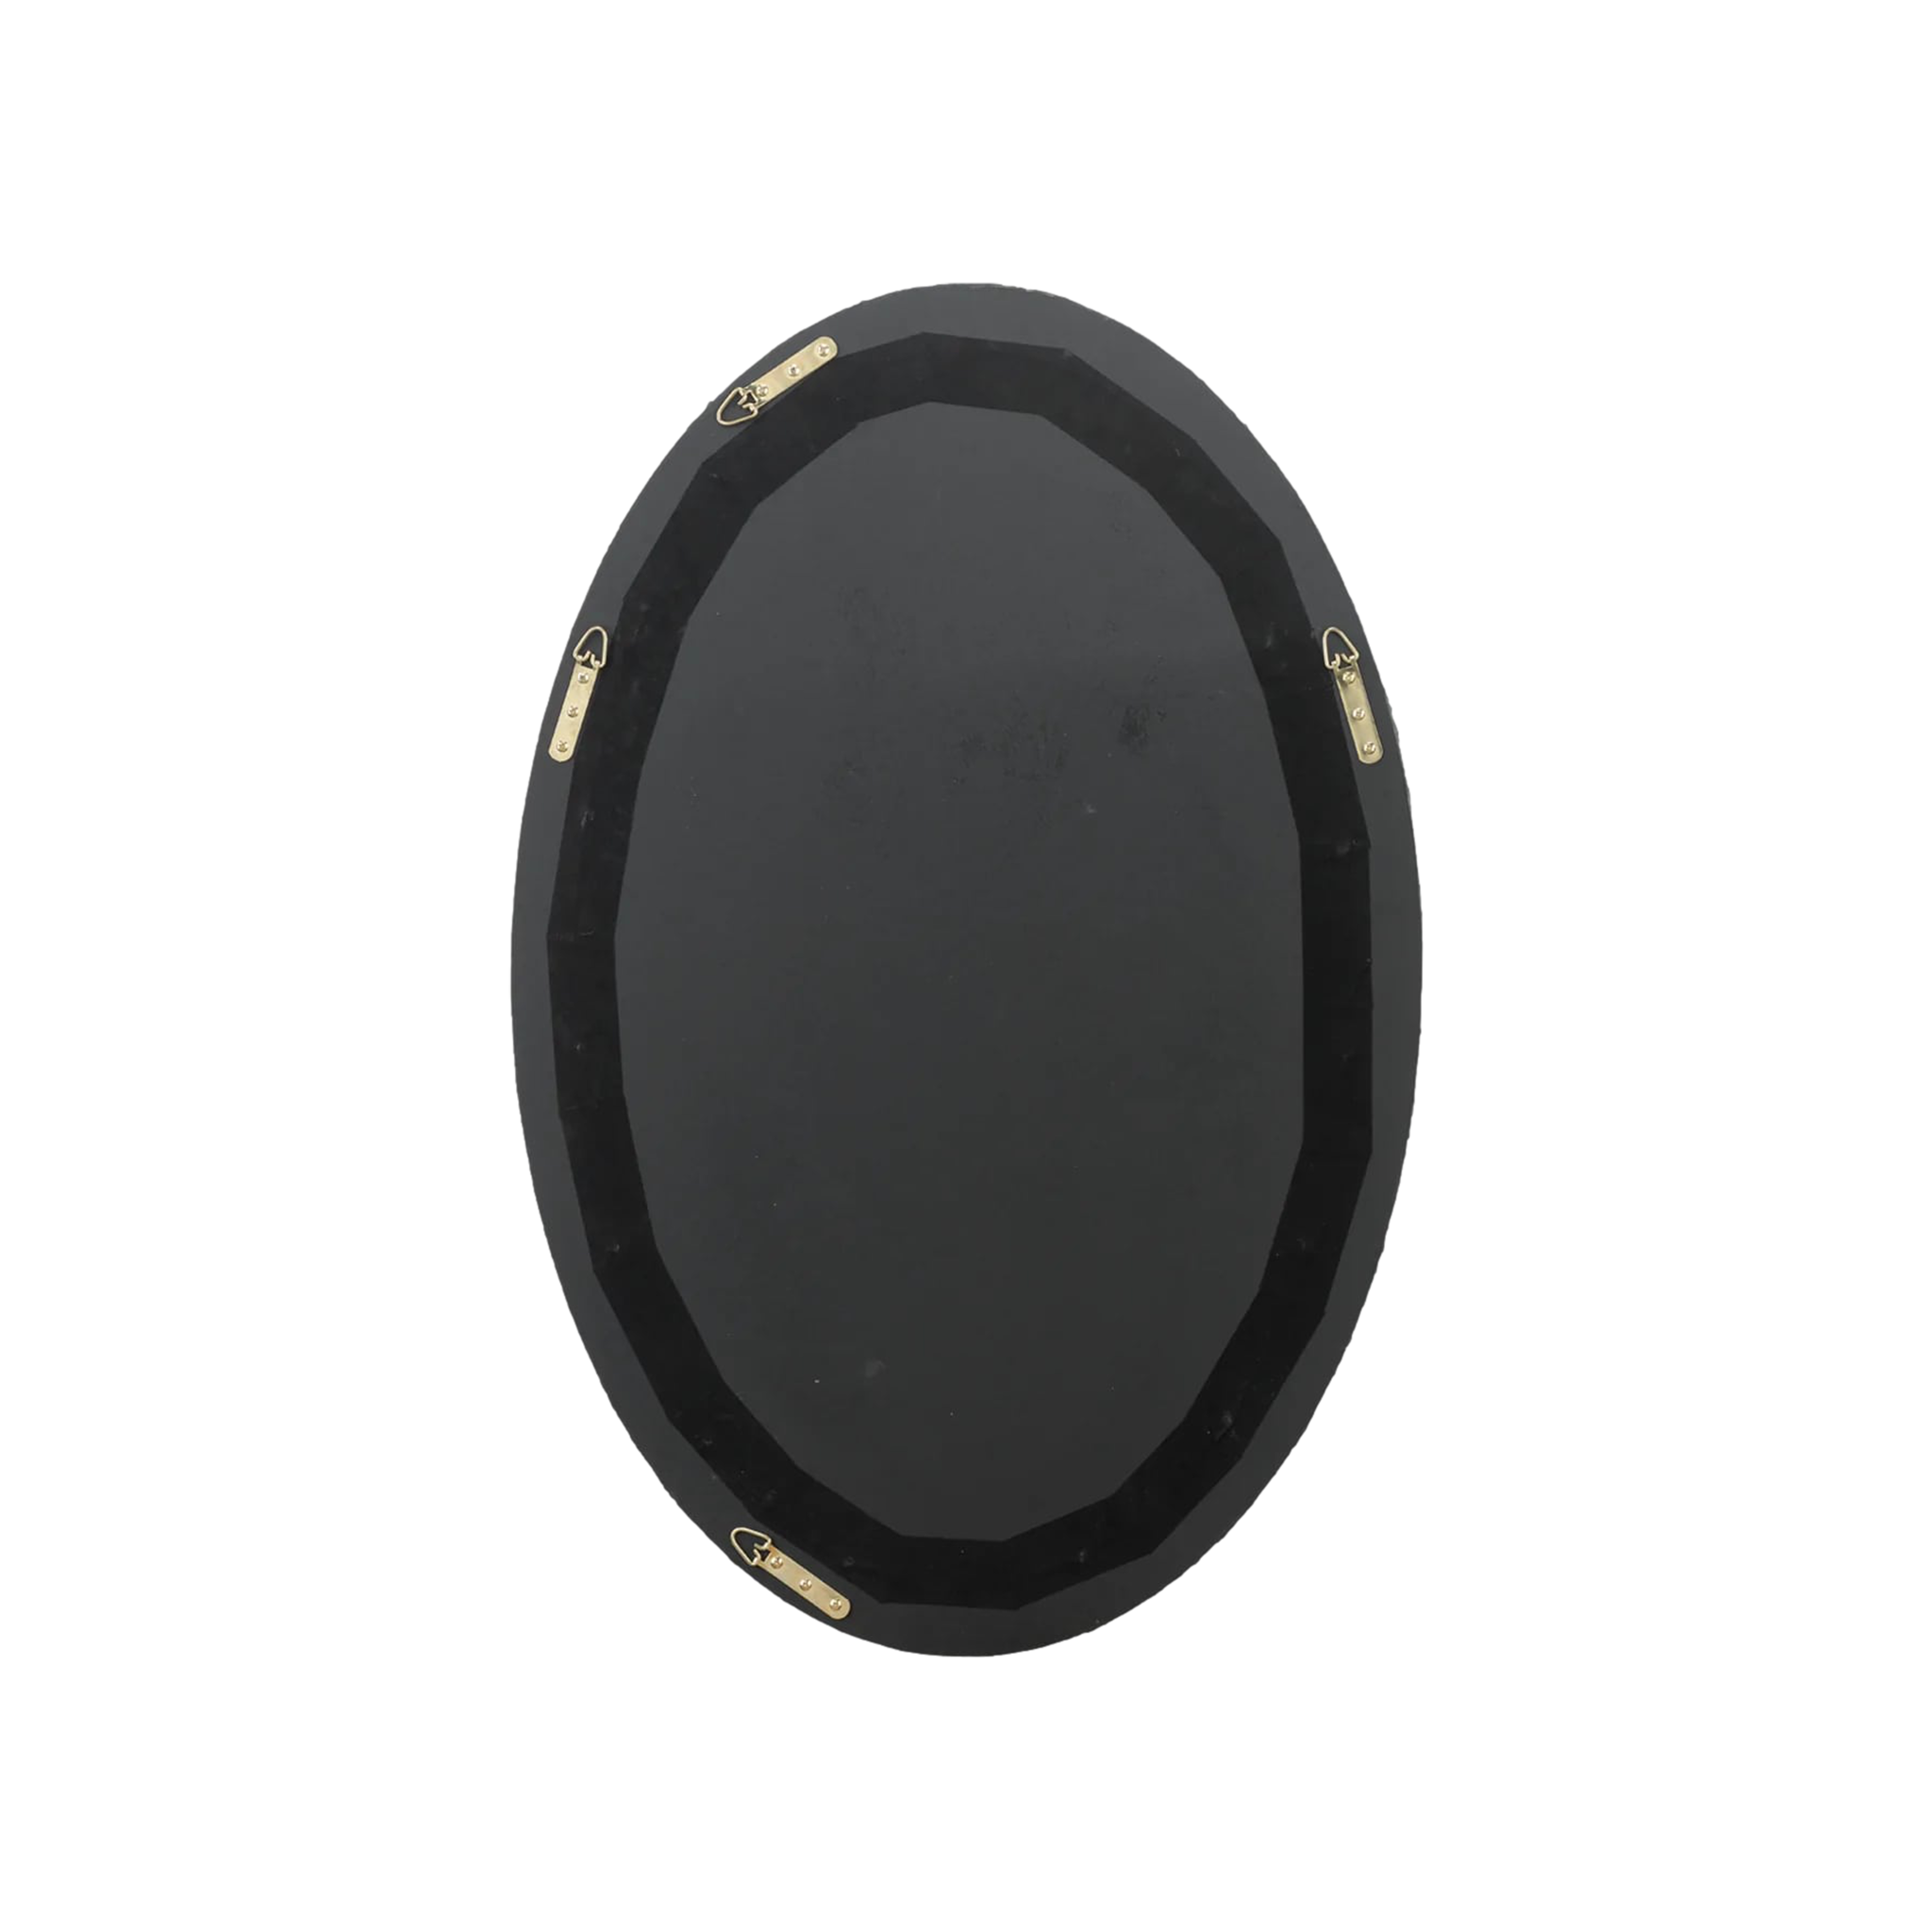 Ovation Oval Mirror (Charcoal)